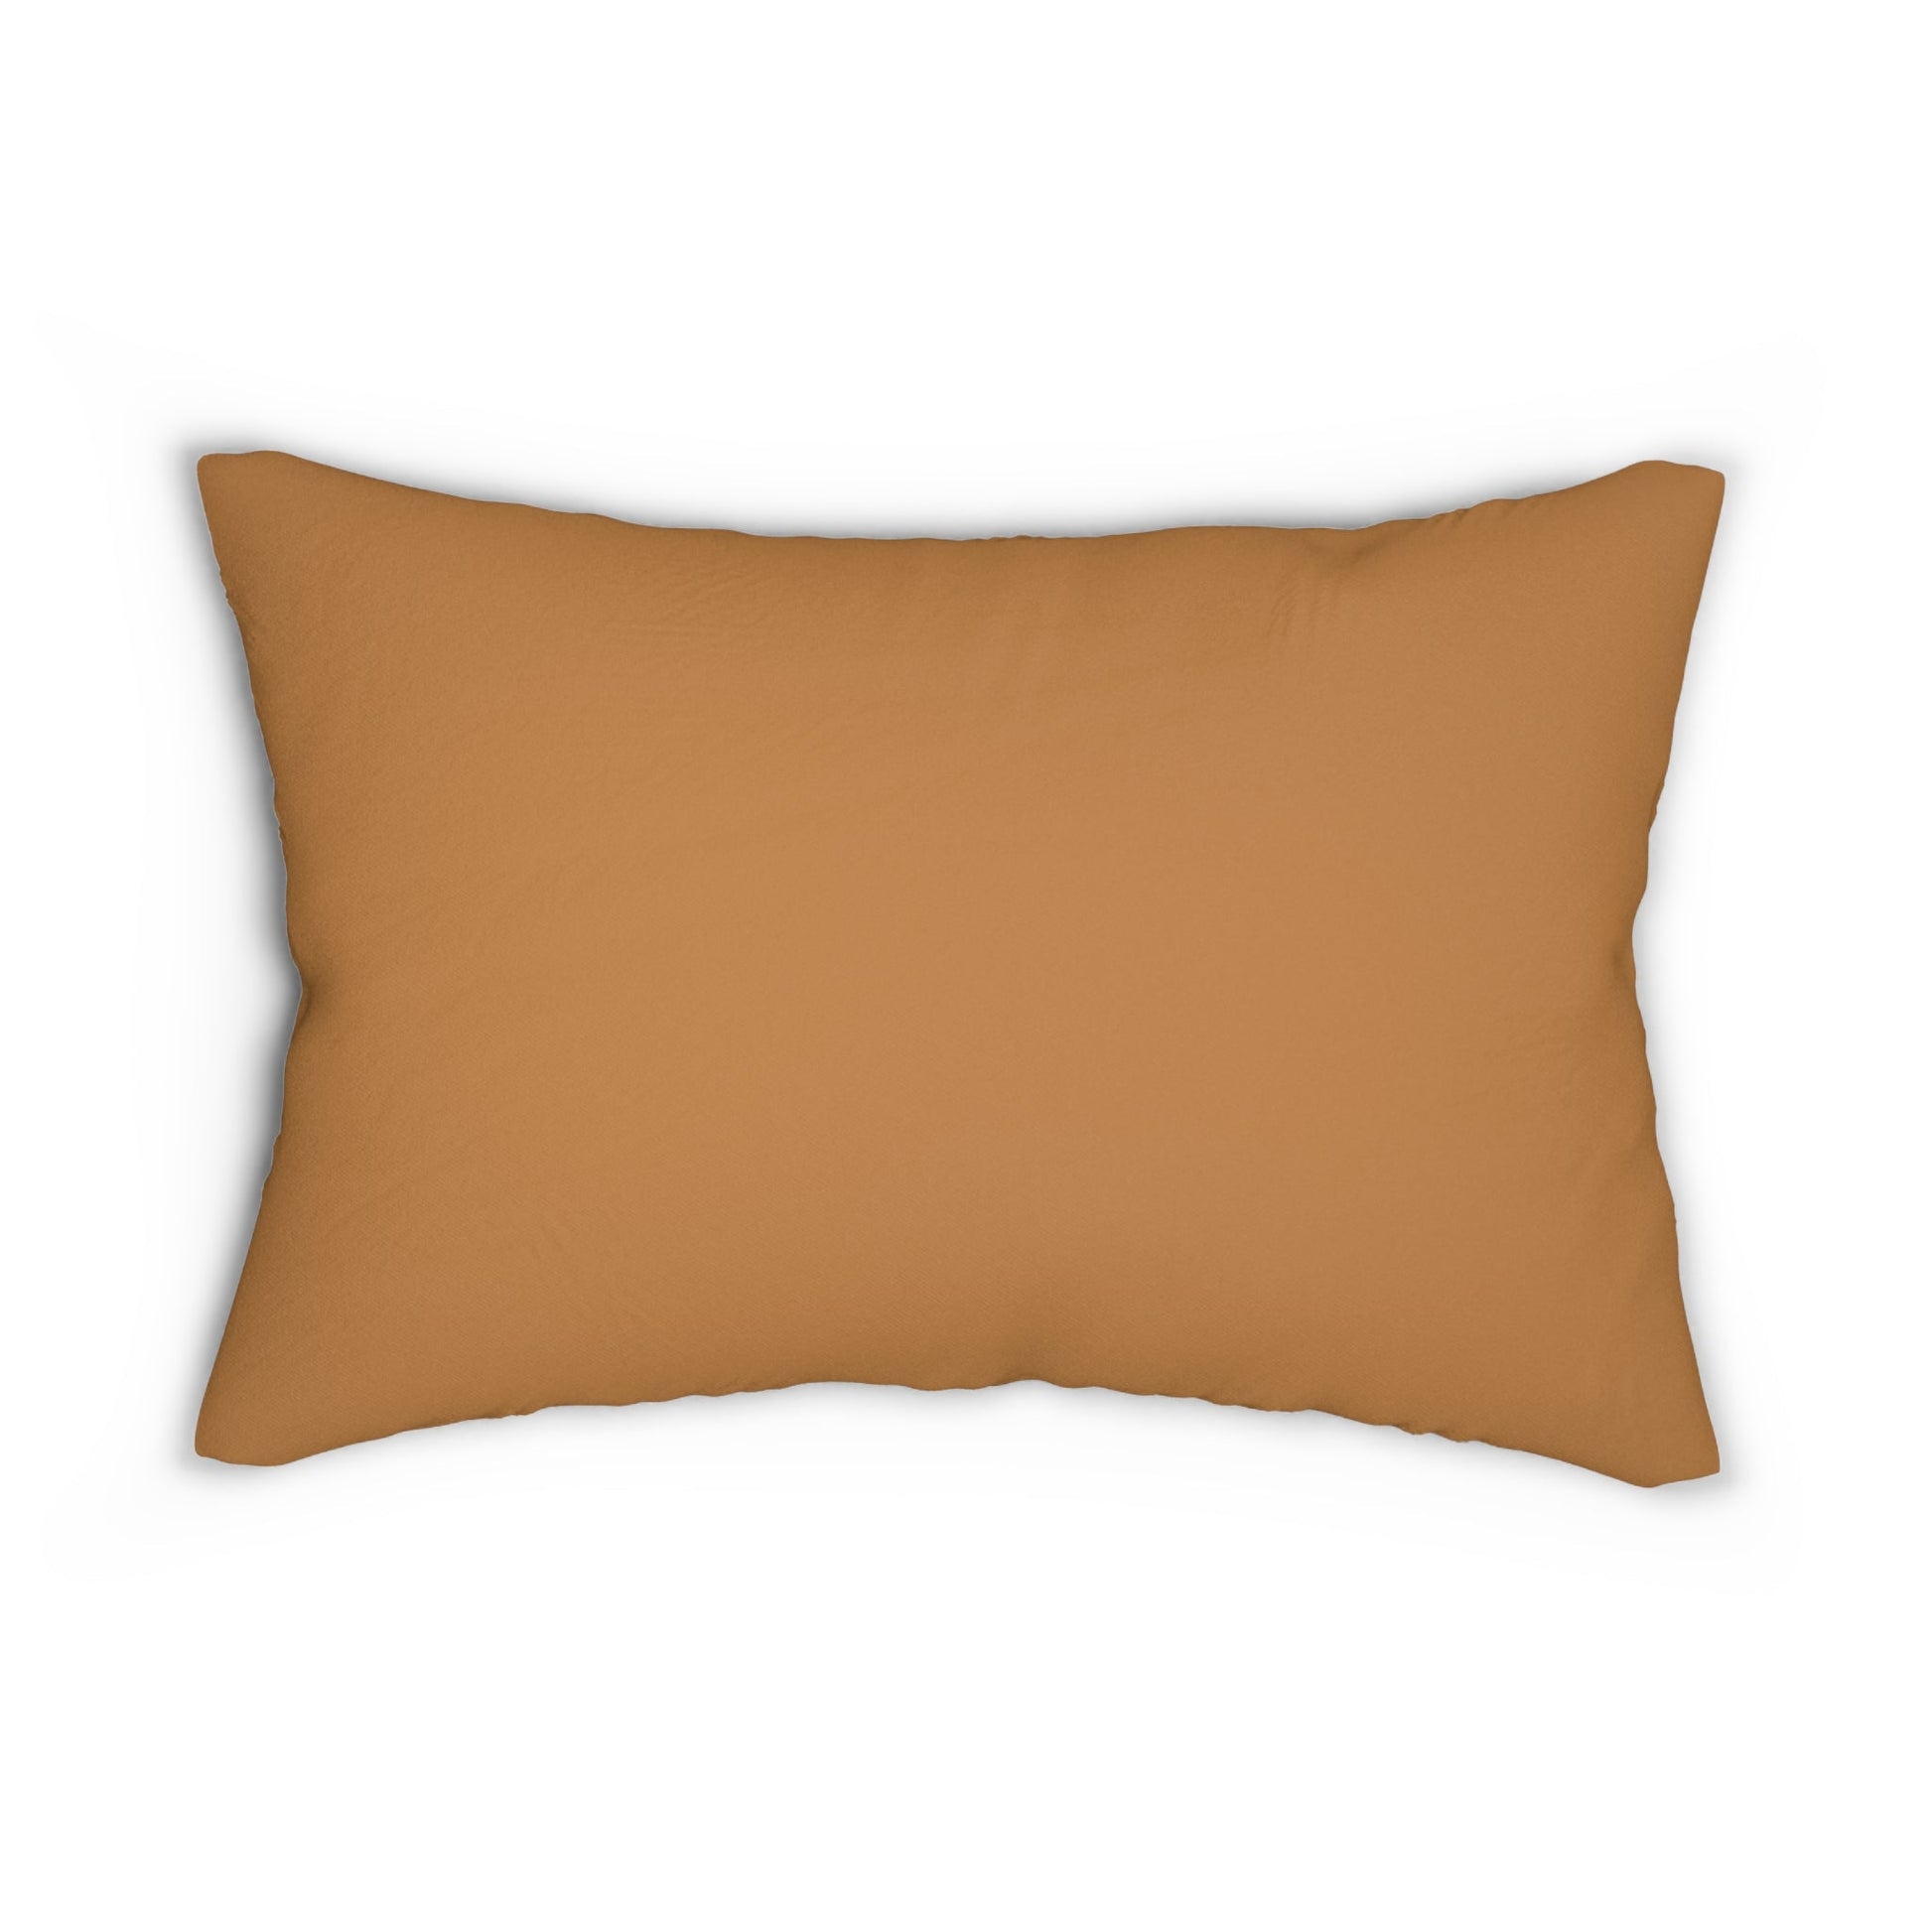 Get trendy with Fall things Spun Polyester Lumbar Pillow - Home Decor available at Good Gift Company. Grab yours for $18 today!